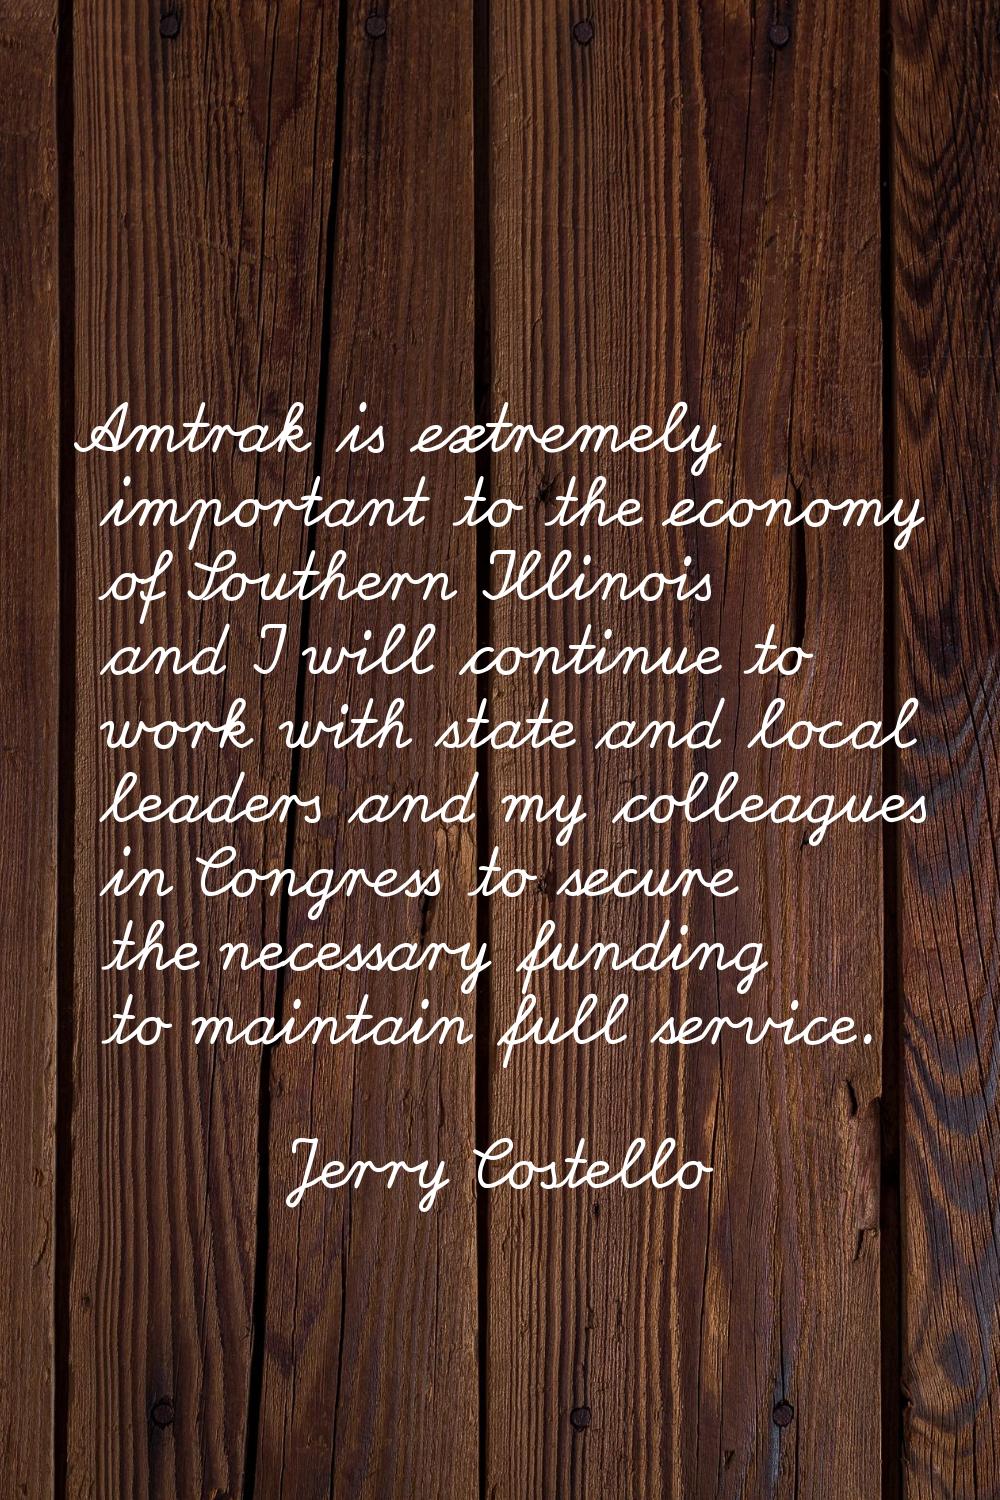 Amtrak is extremely important to the economy of Southern Illinois and I will continue to work with 